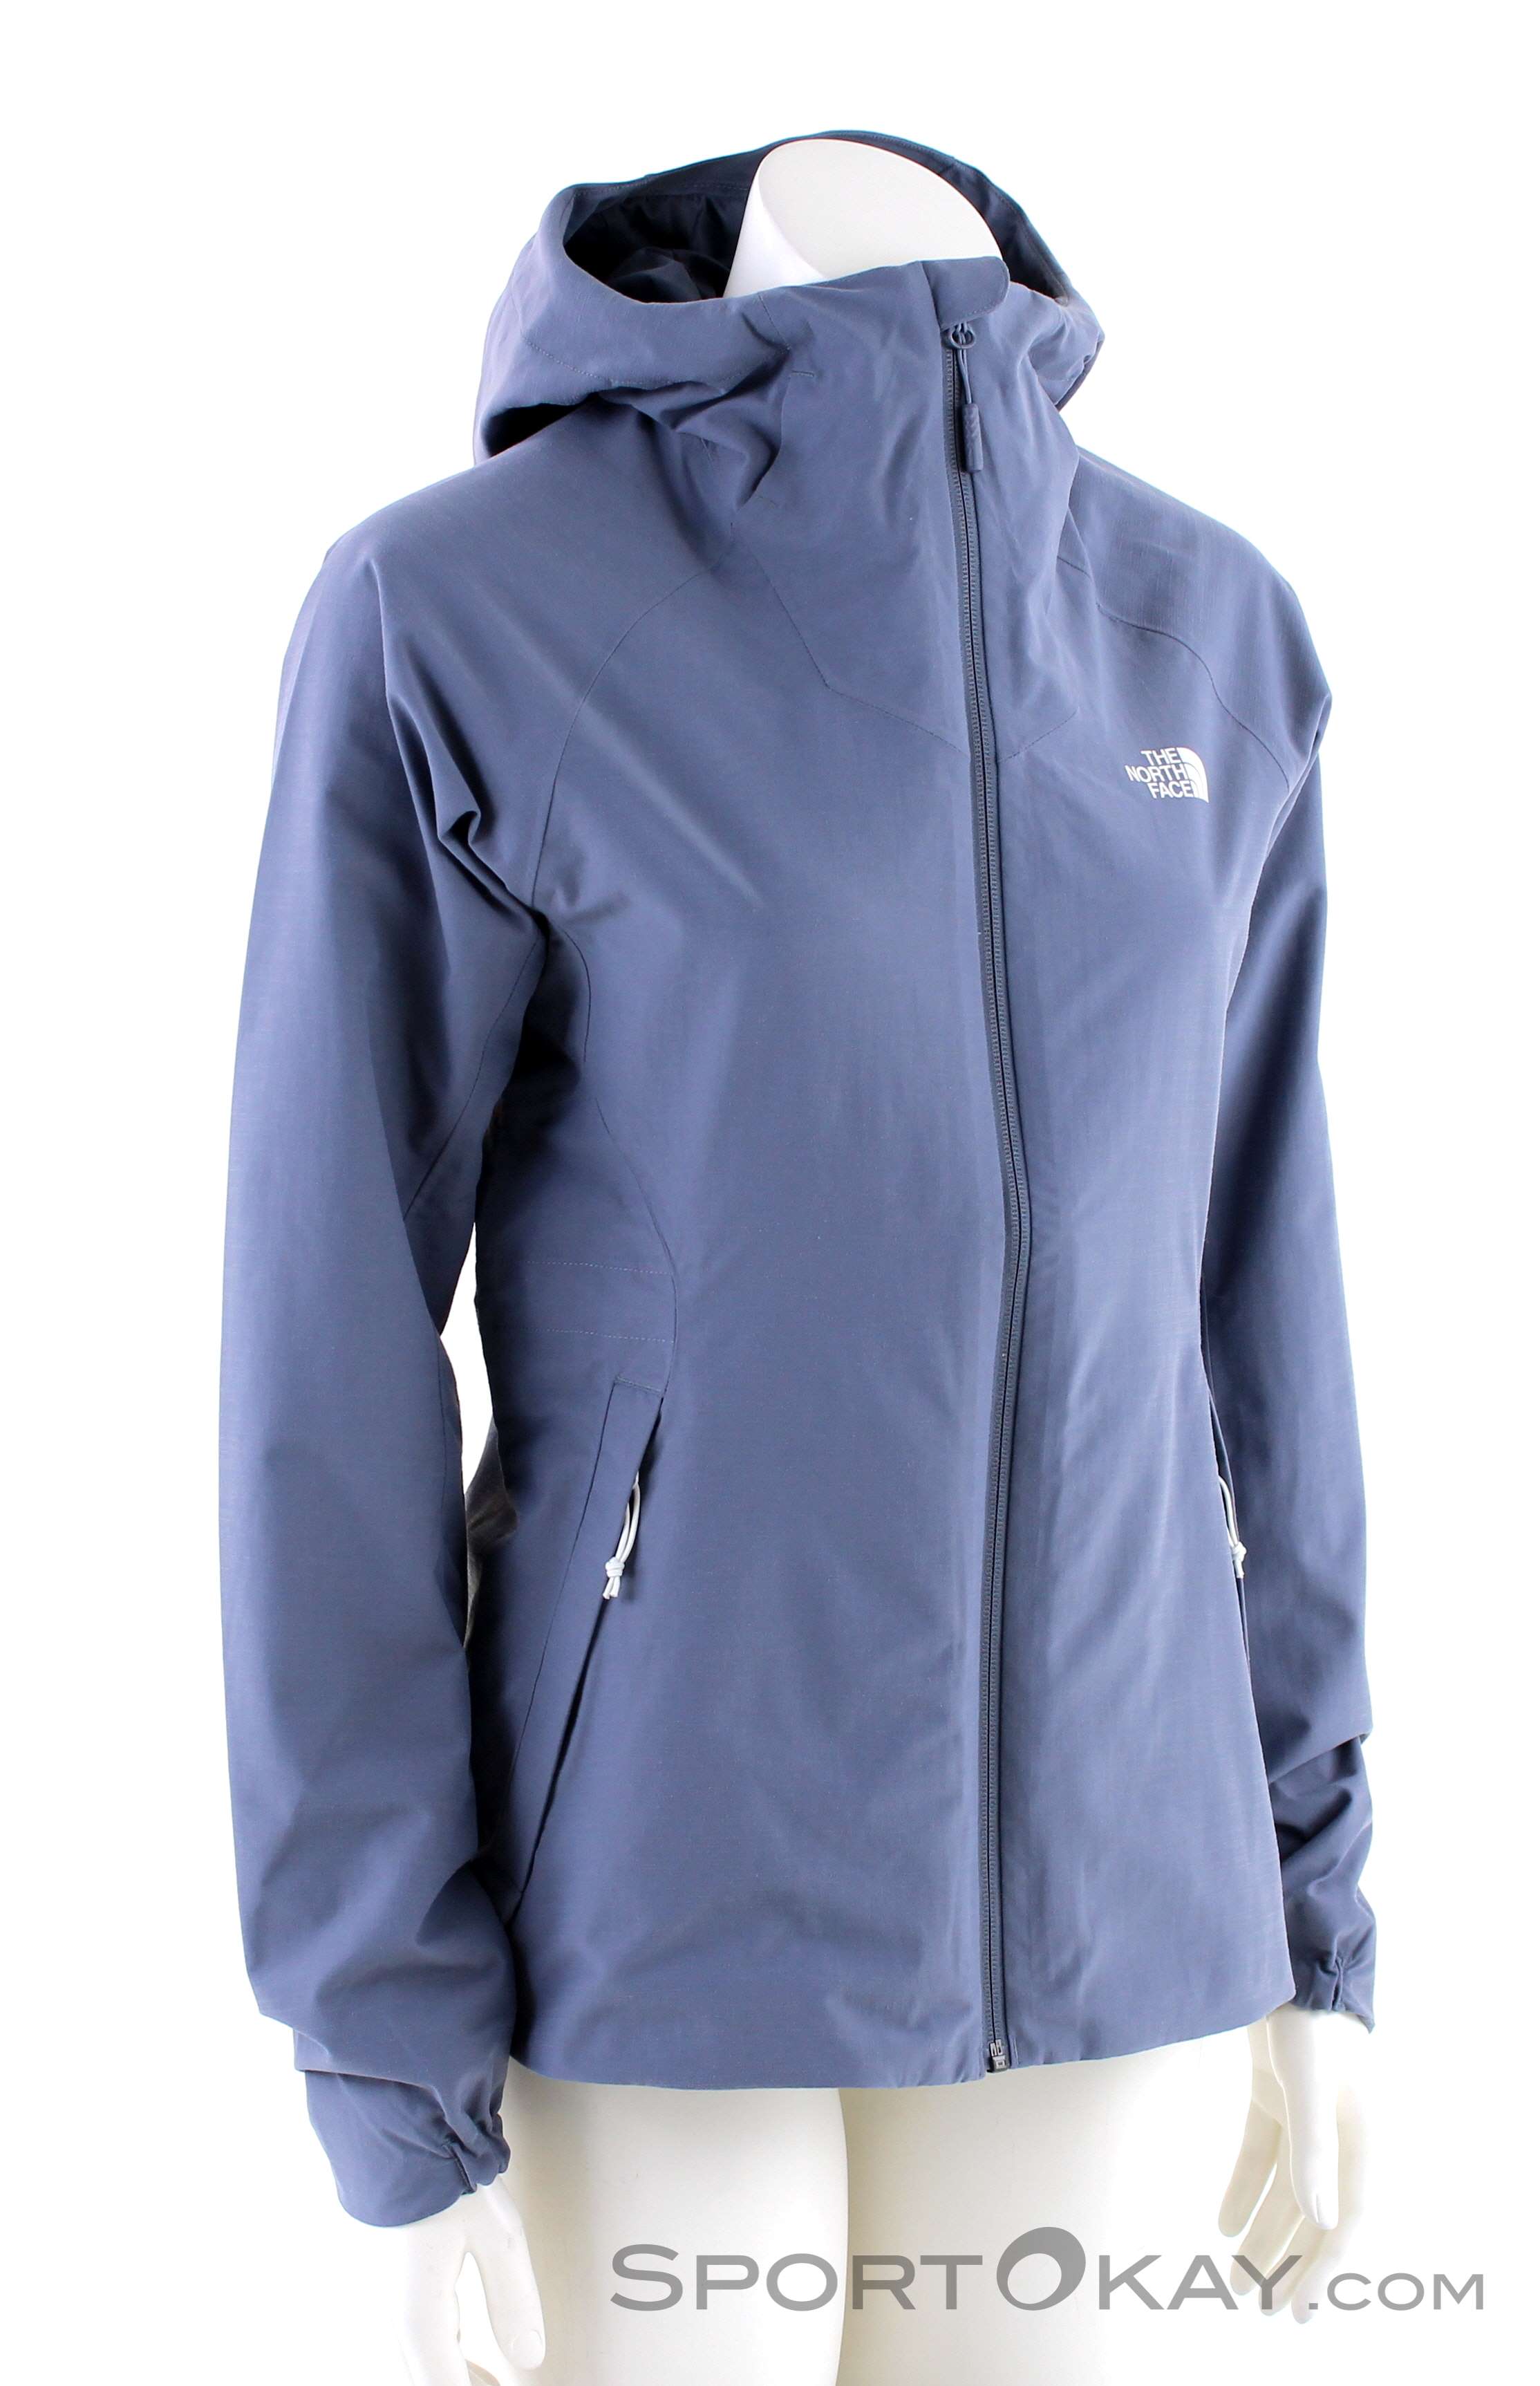 north face women's polyester jacket